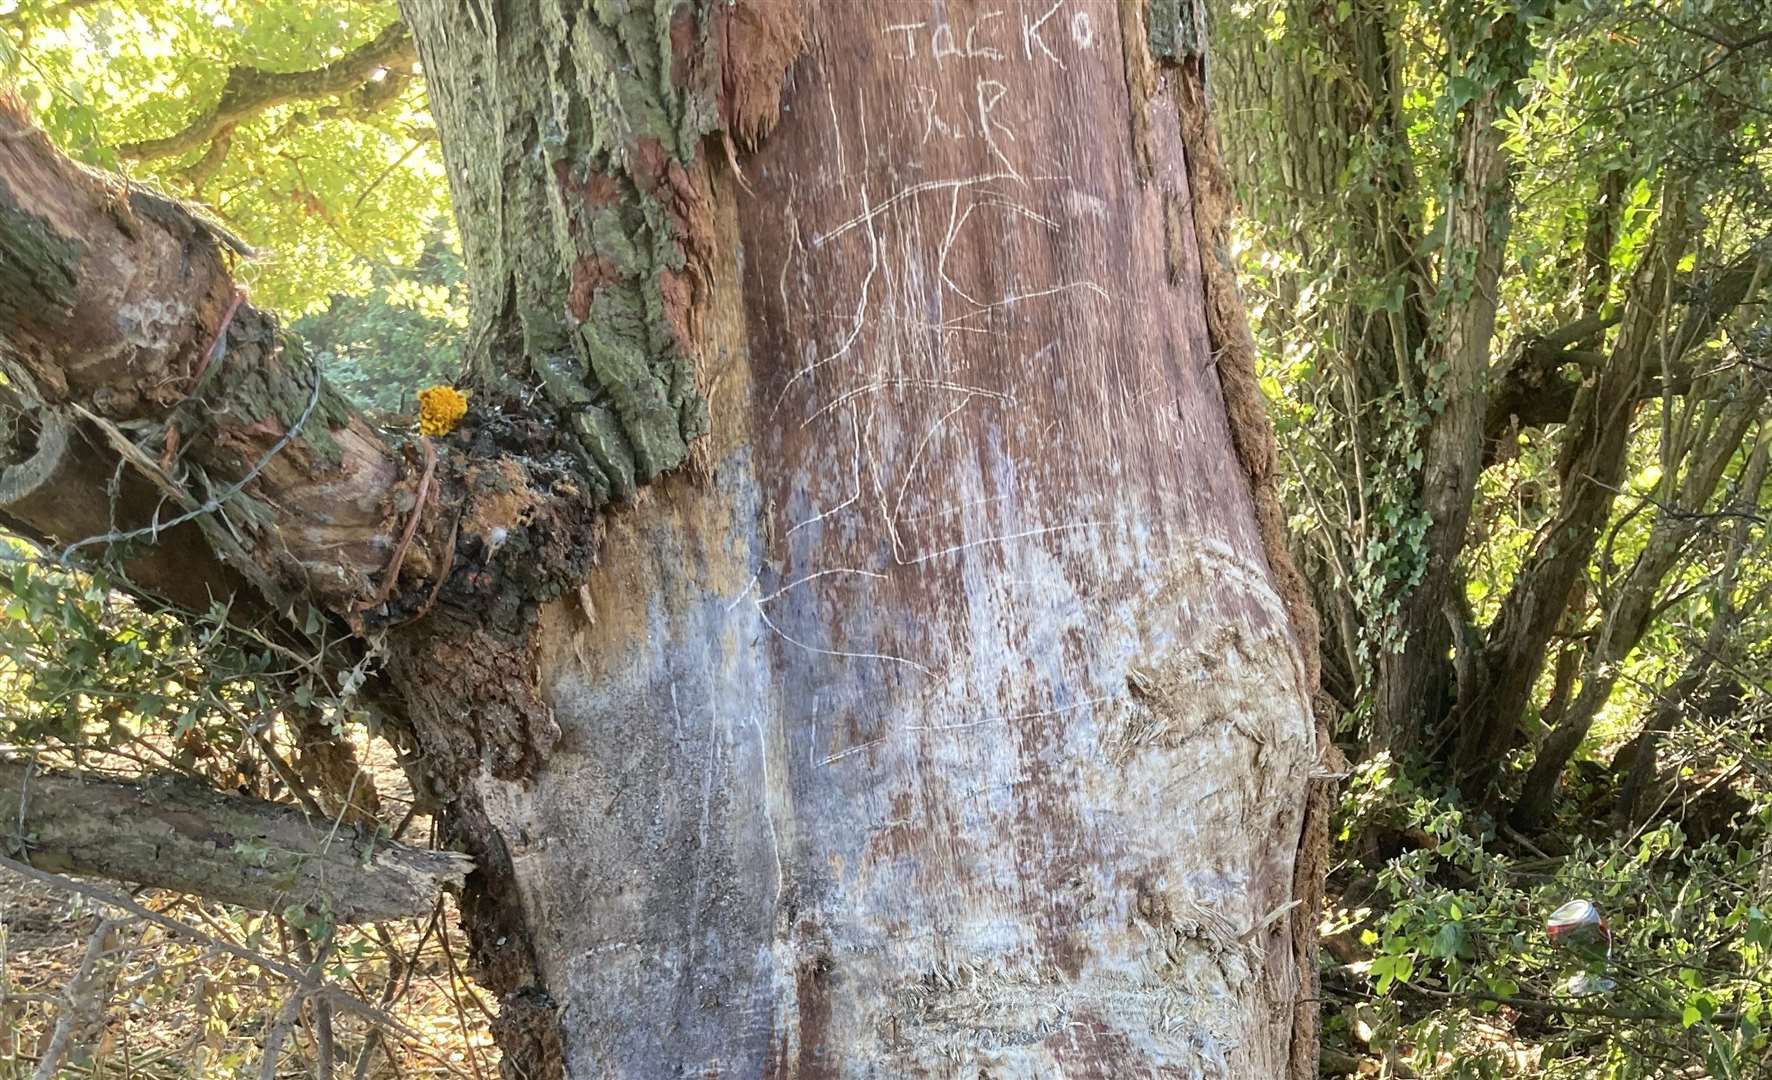 The victims' names have been carved into the truck of a tree where the accident happened